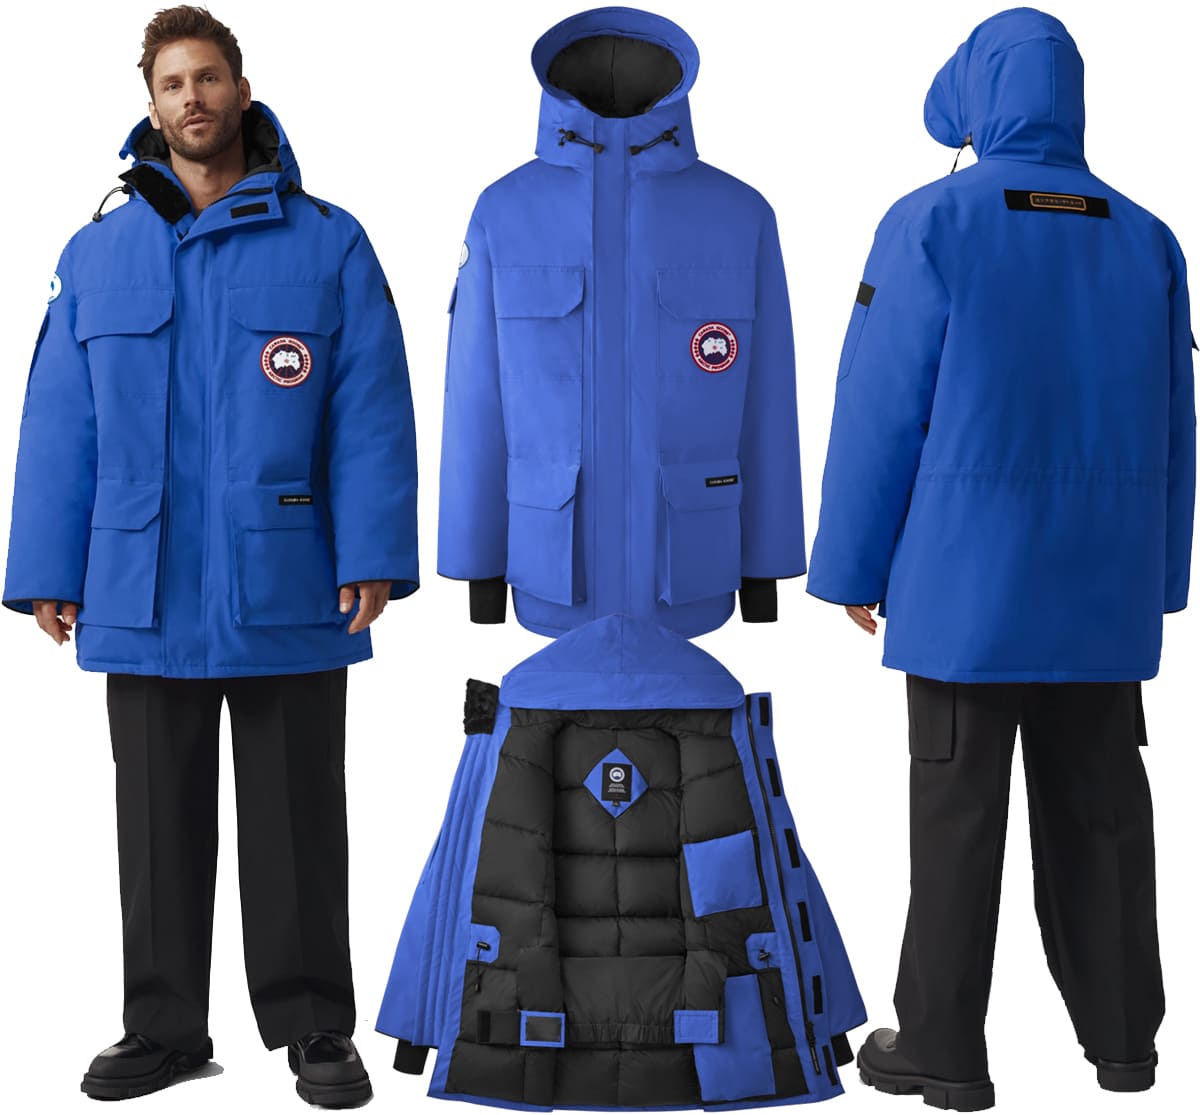 The original extreme weather parka, the PBI Expedition was developed for scientists working in McMurdo Station, Antarctica